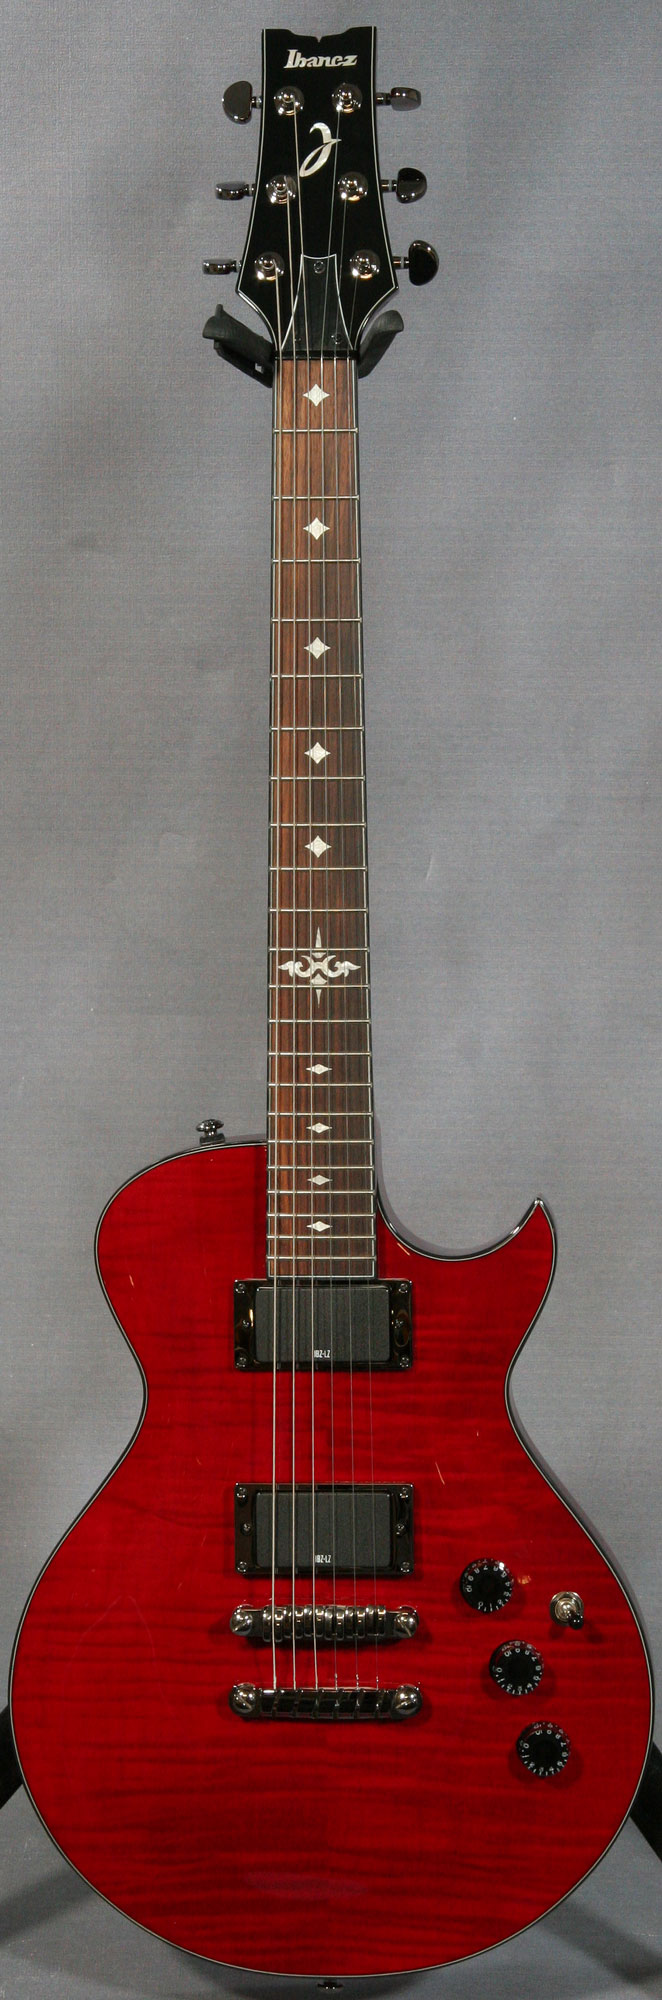 ibanez serial number search